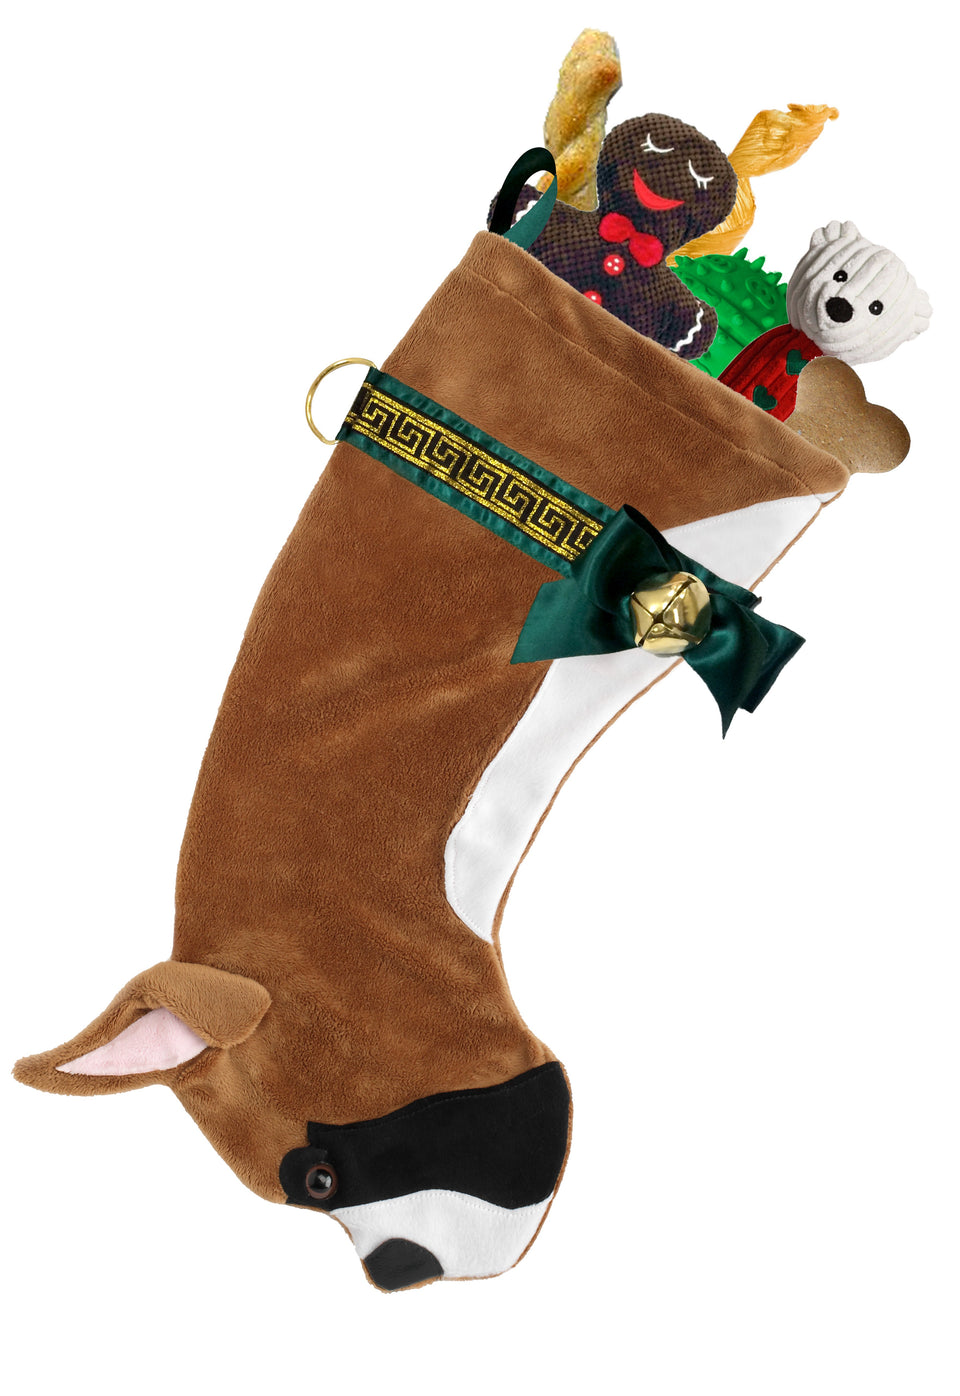 This Boxer dog shaped Christmas stocking is the perfect gift for stuffing toys and treats into to spoil your fur baby for Christmas, or whatever holiday you celebrate!